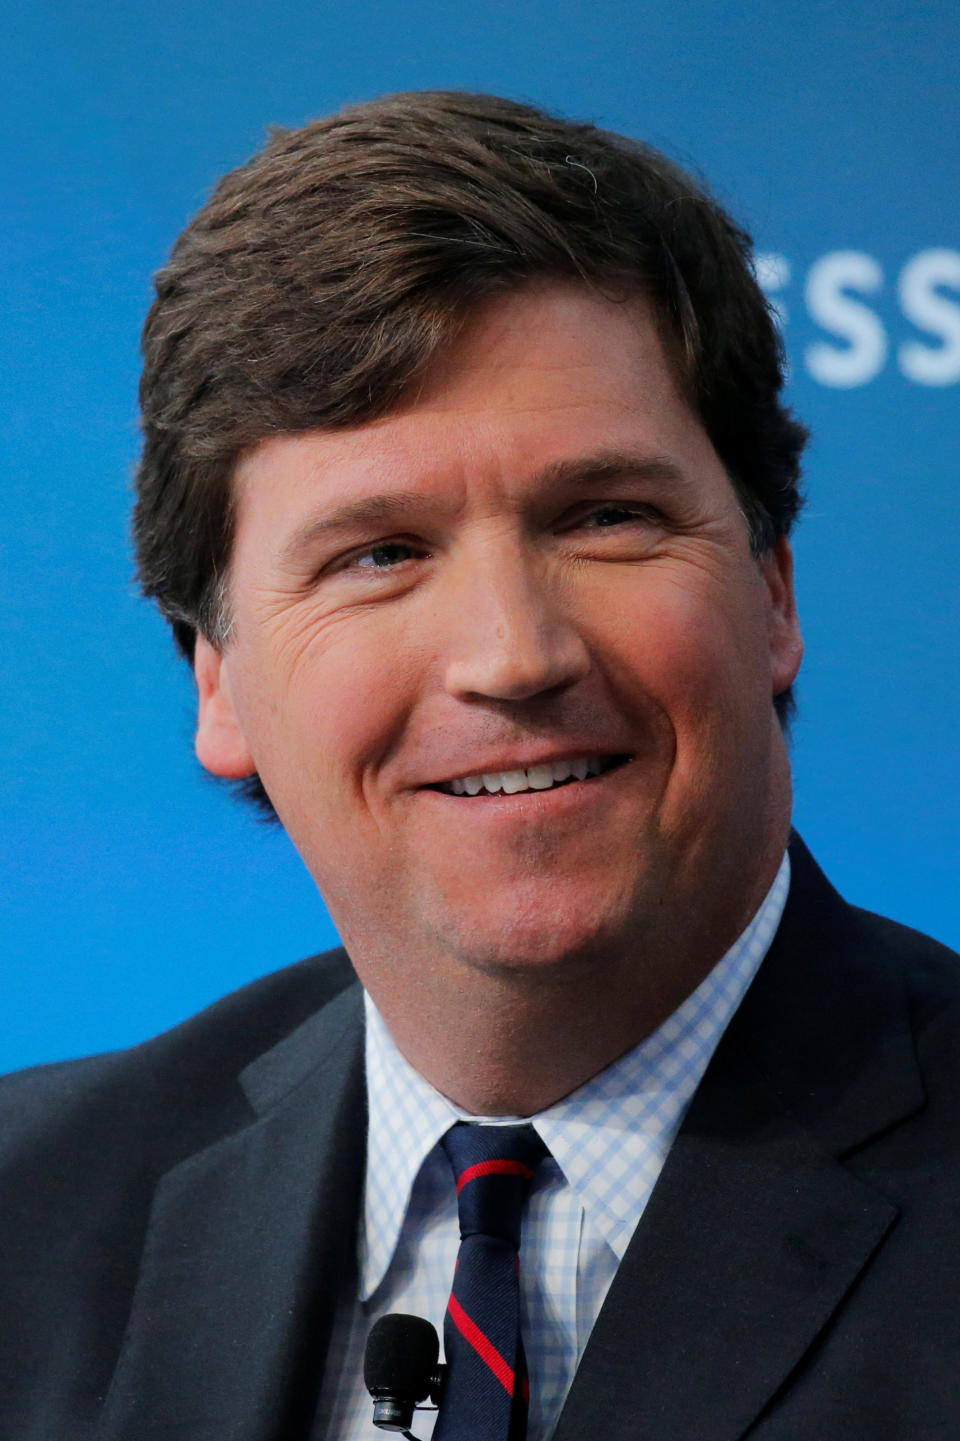 <em>Tucker Carlson warned that people don’t actually know what happened in Syria (Picture: Reuters)</em>